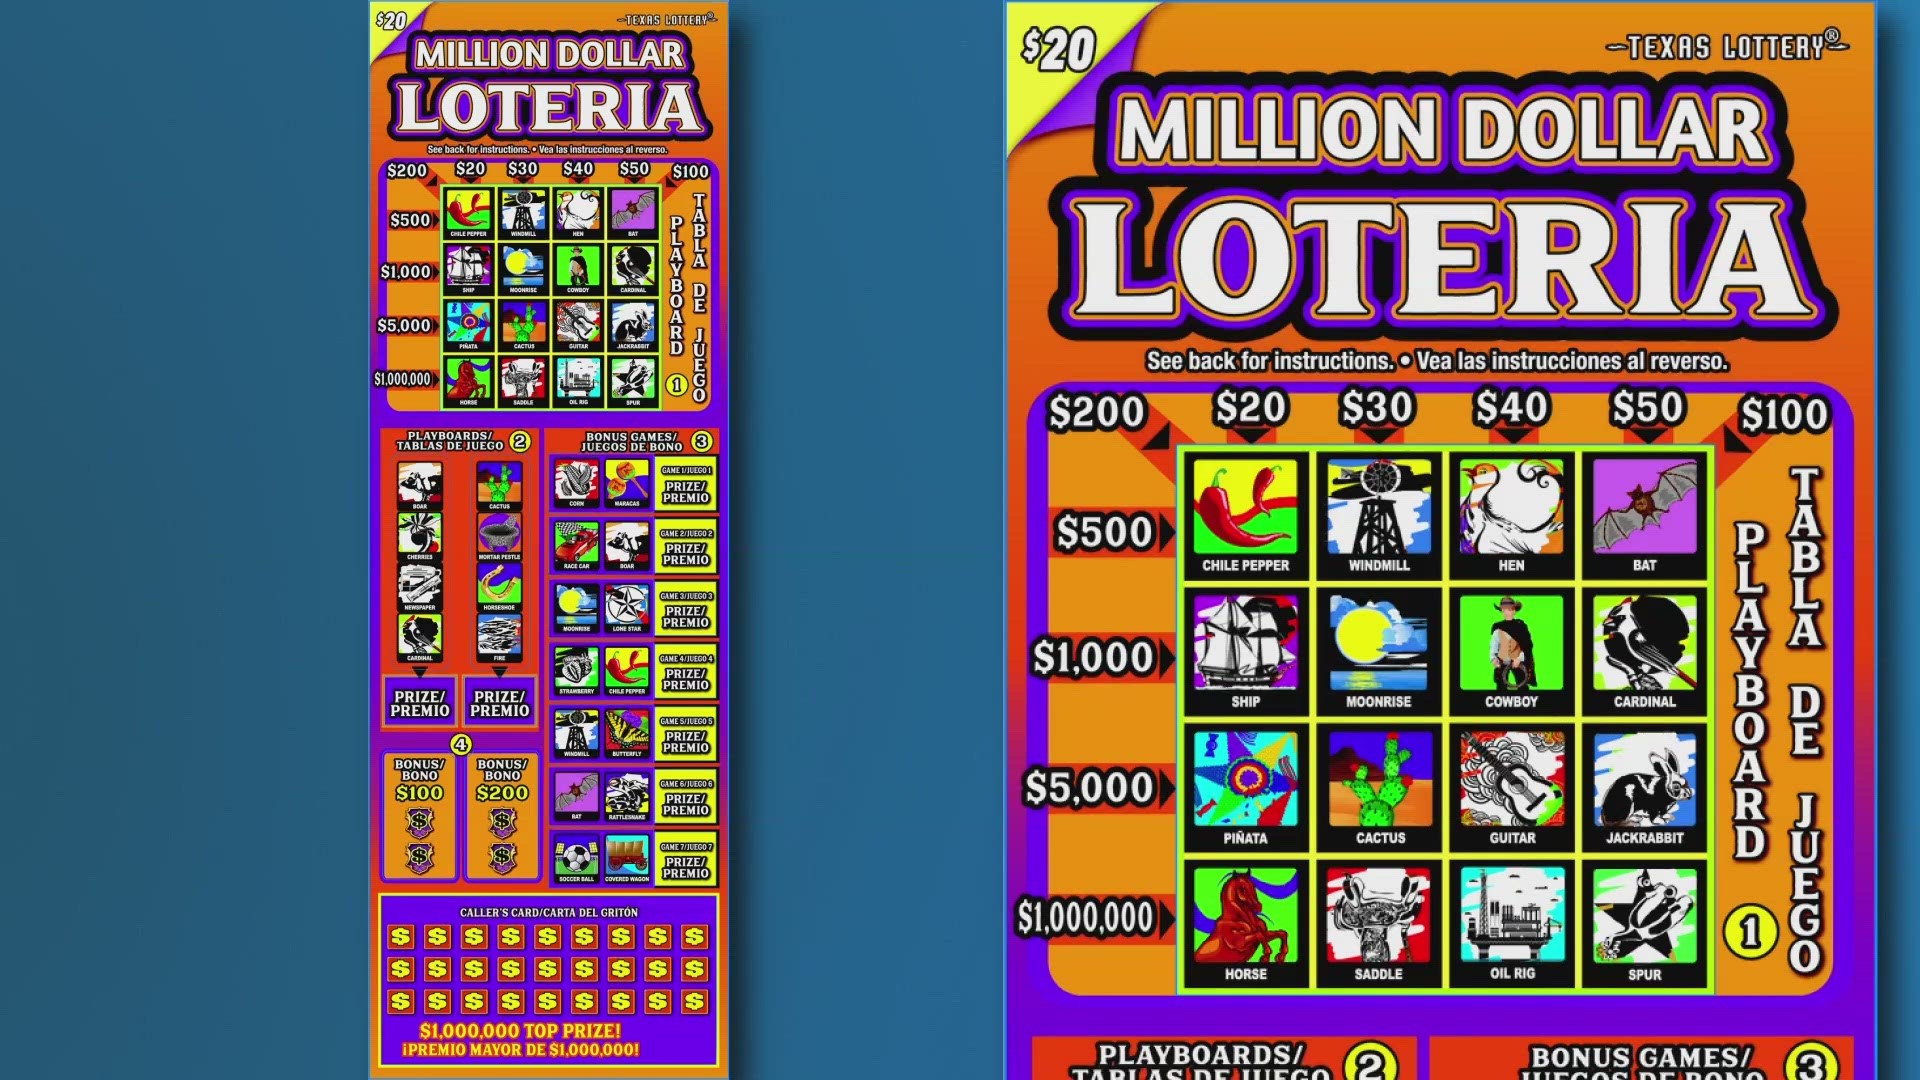 The lucky winner won the top prize from the Texas Lottery's scratch ticket game Million Dollar Loteria.